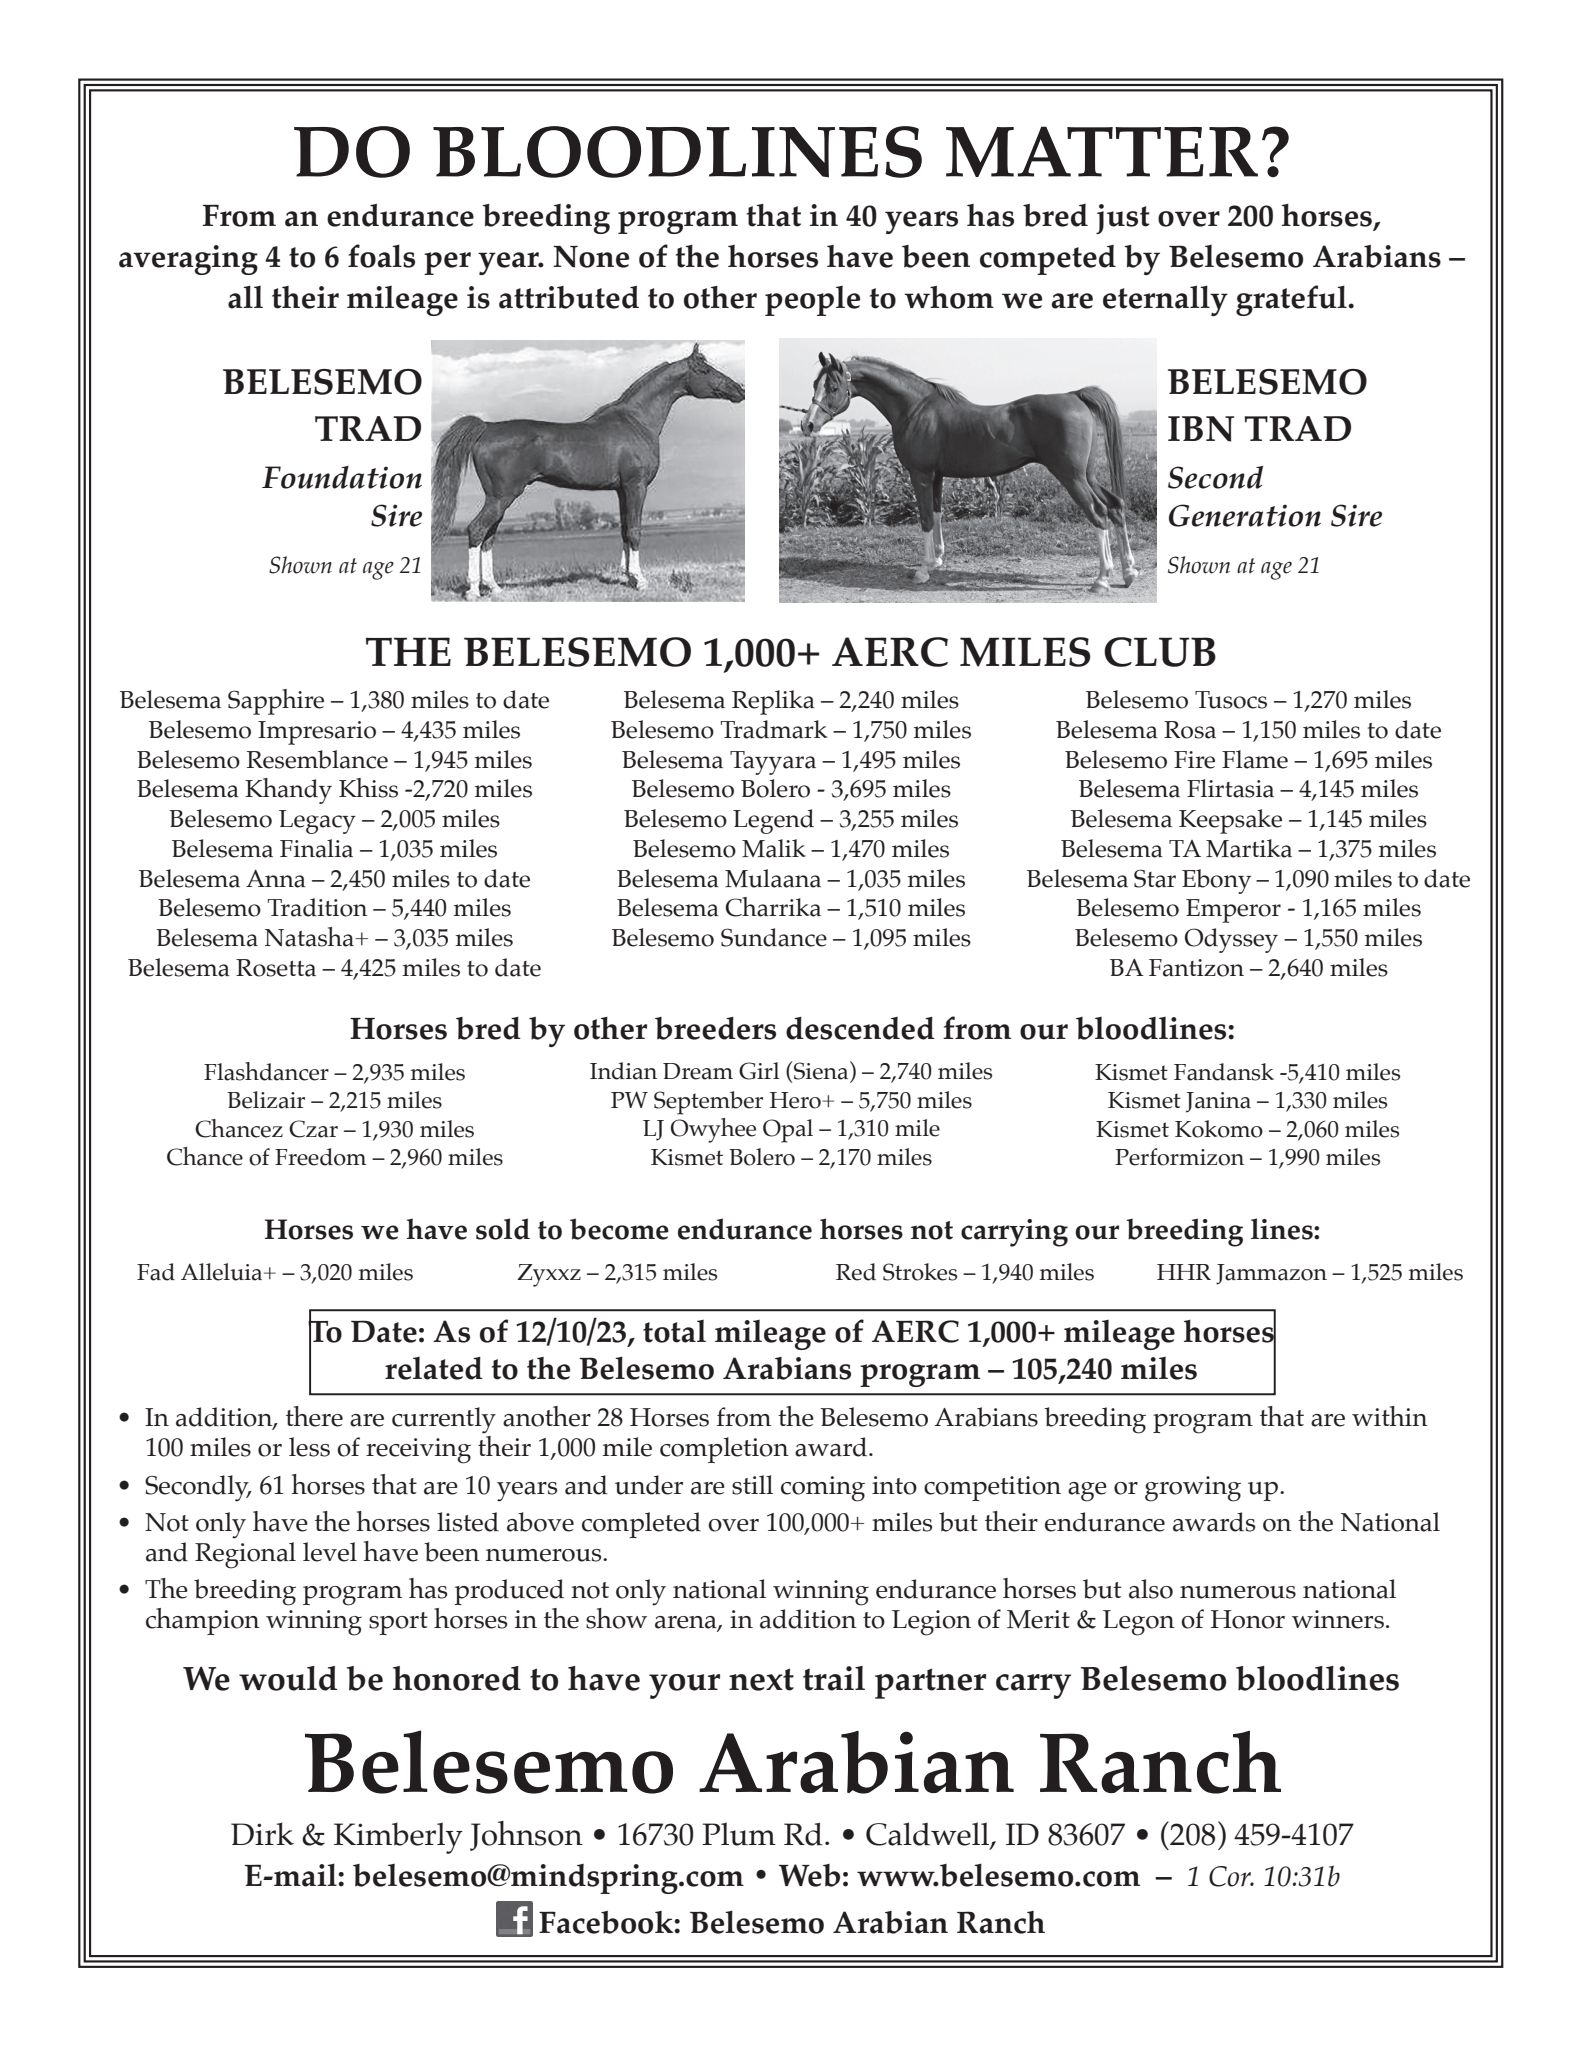 Belesemo Arabians blood lines over the years